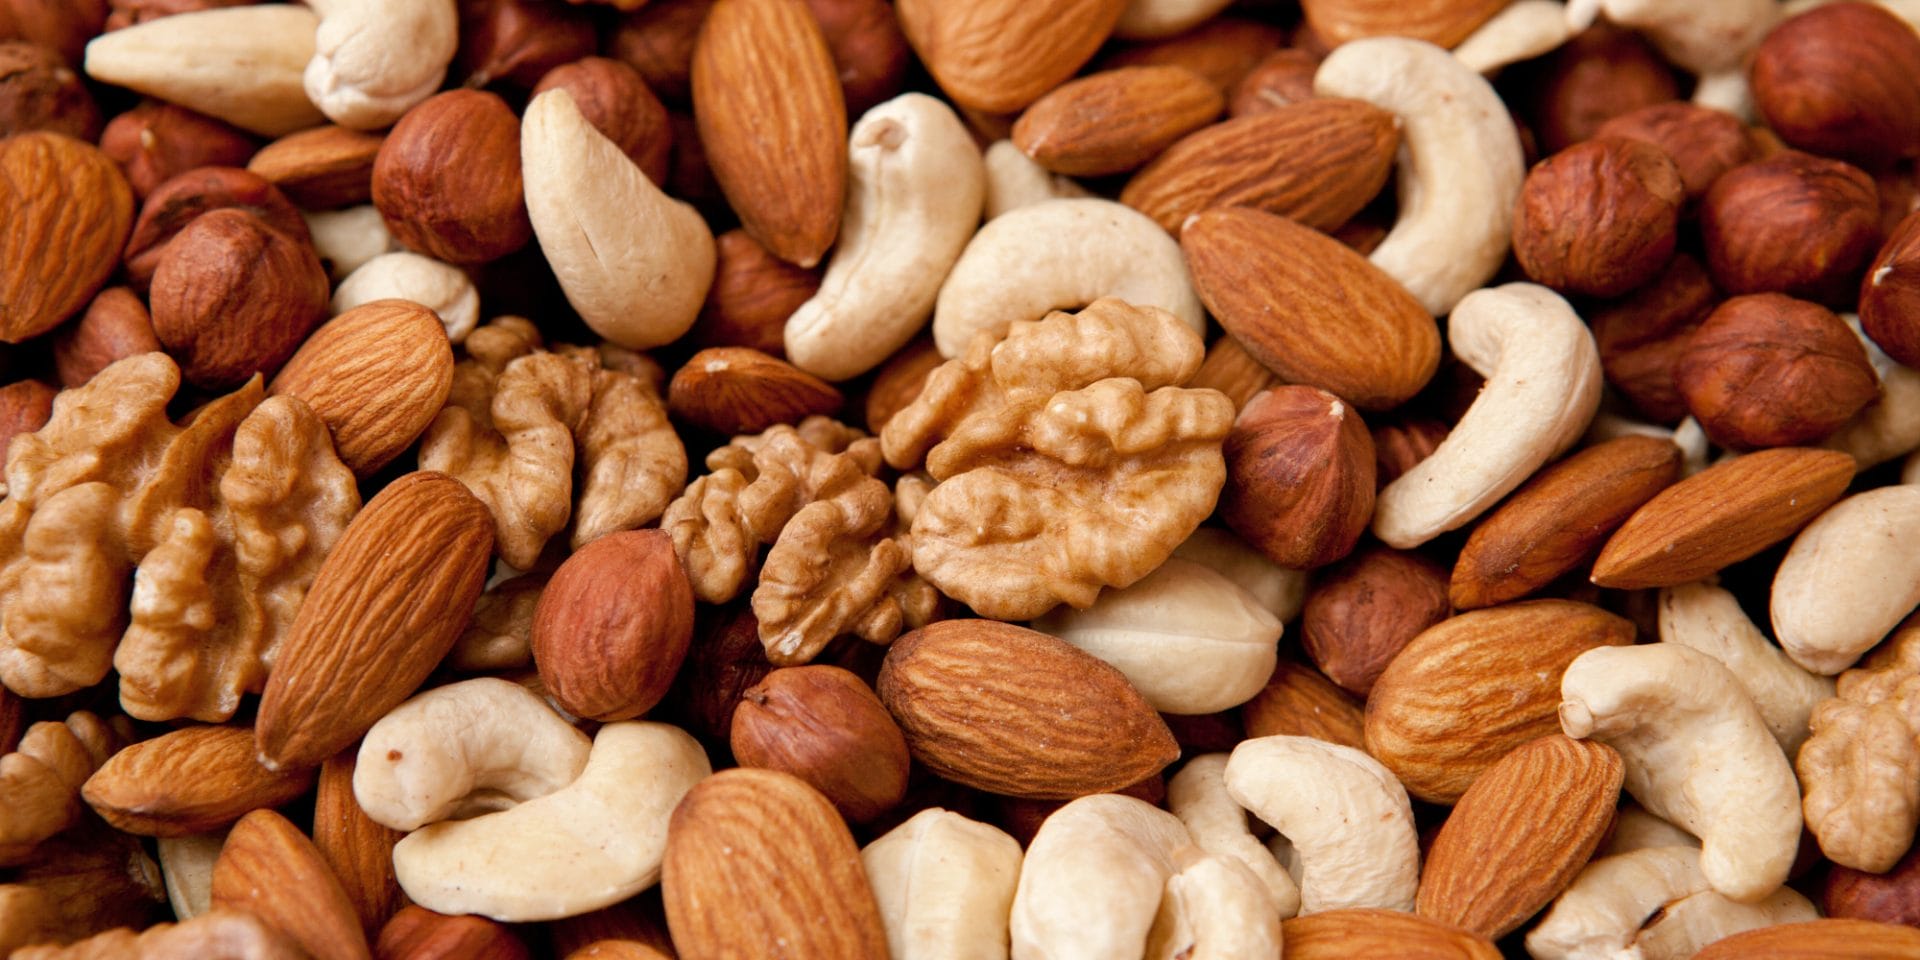 Almonds or Peanuts Which Has More Power? Know the benefits